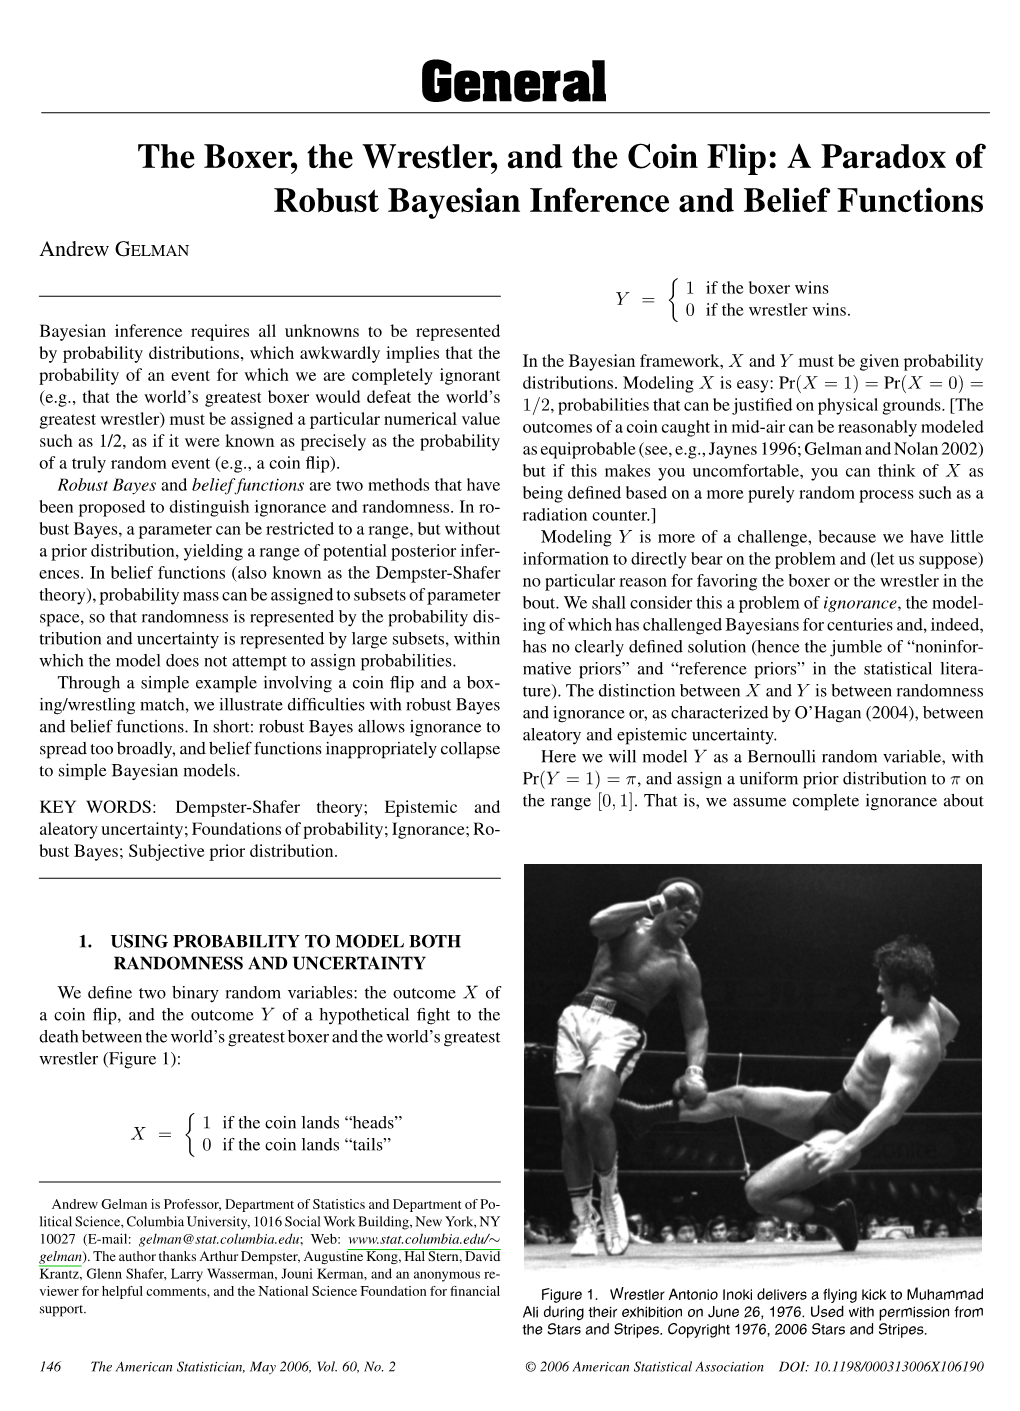 The Boxer, the Wrestler, and the Coin Flip: a Paradox of Robust Bayesian Inference and Belief Functions